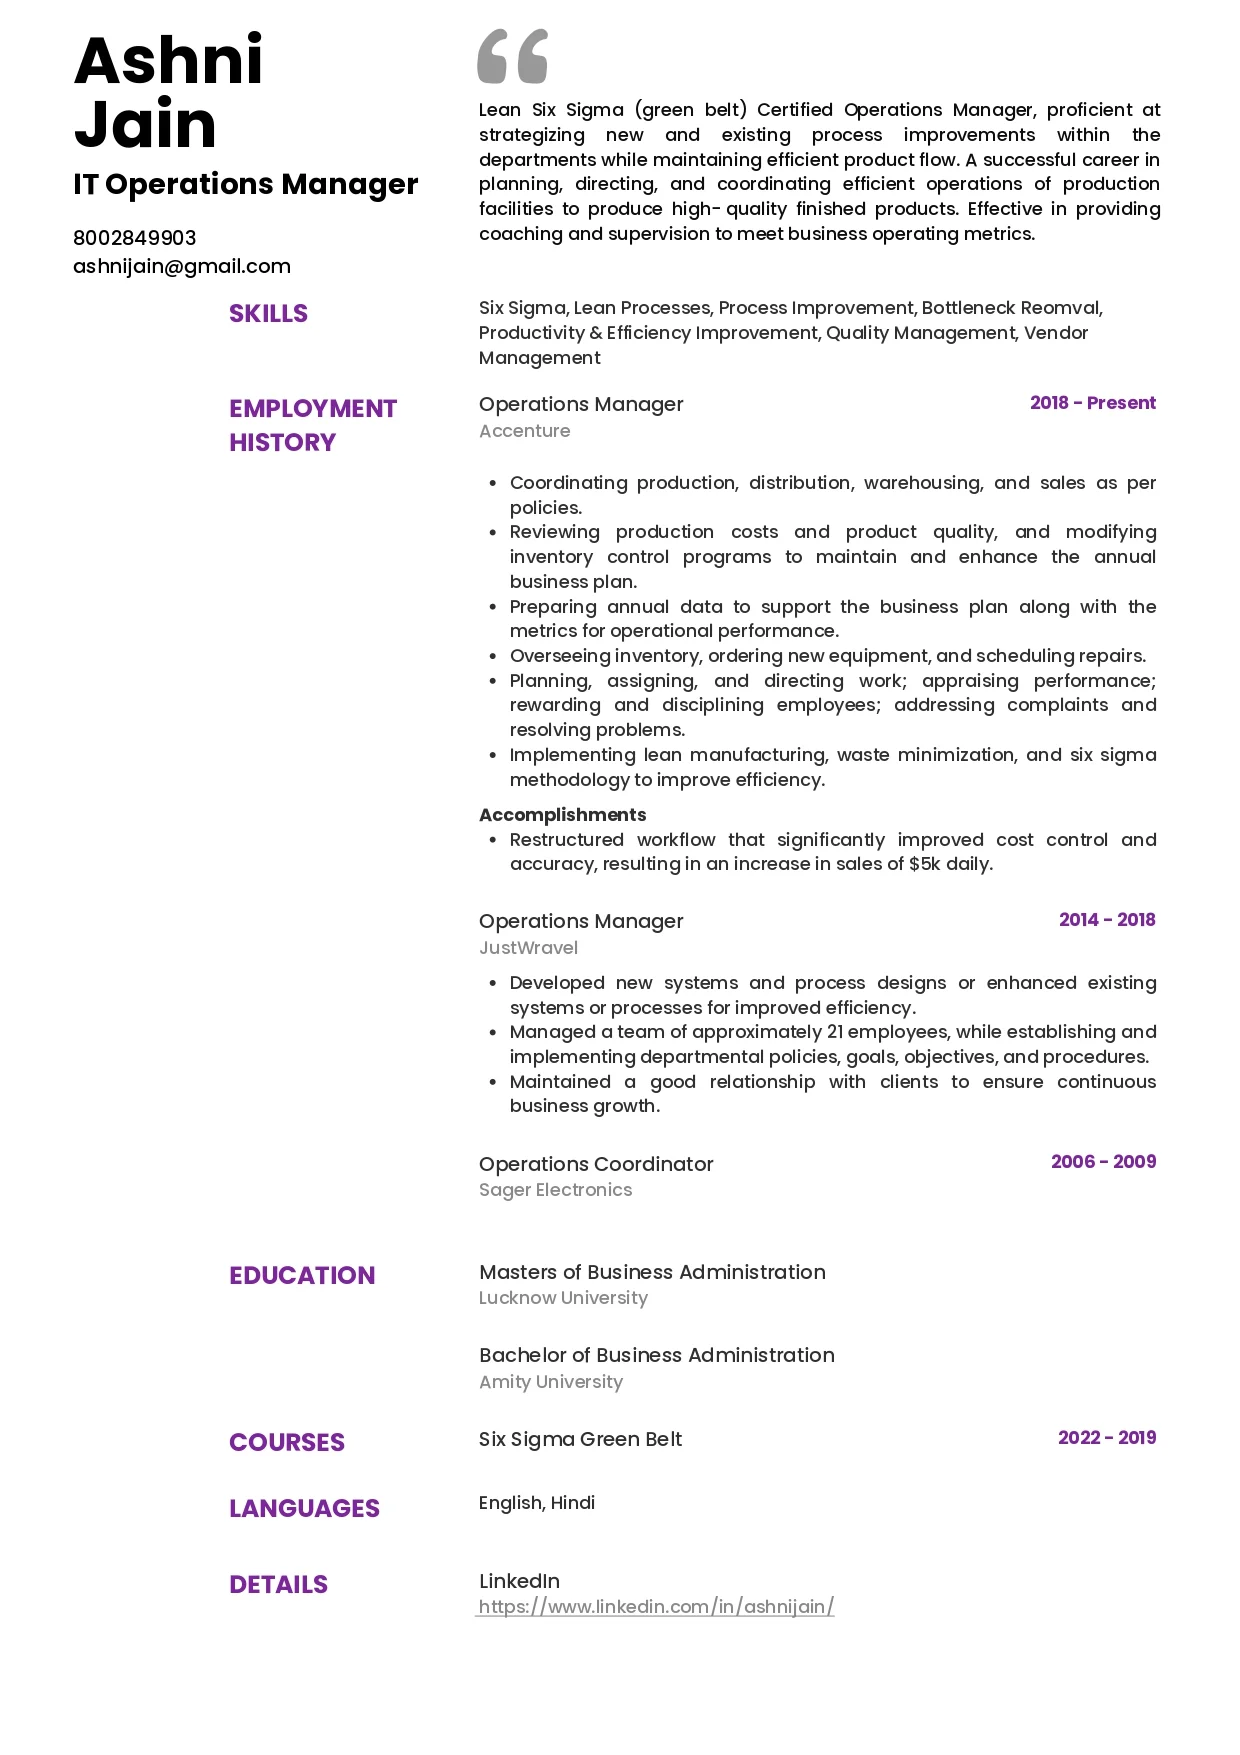 Sample Resume of Operations Manager (IT) | Free Resume Templates & Samples on Resumod.co